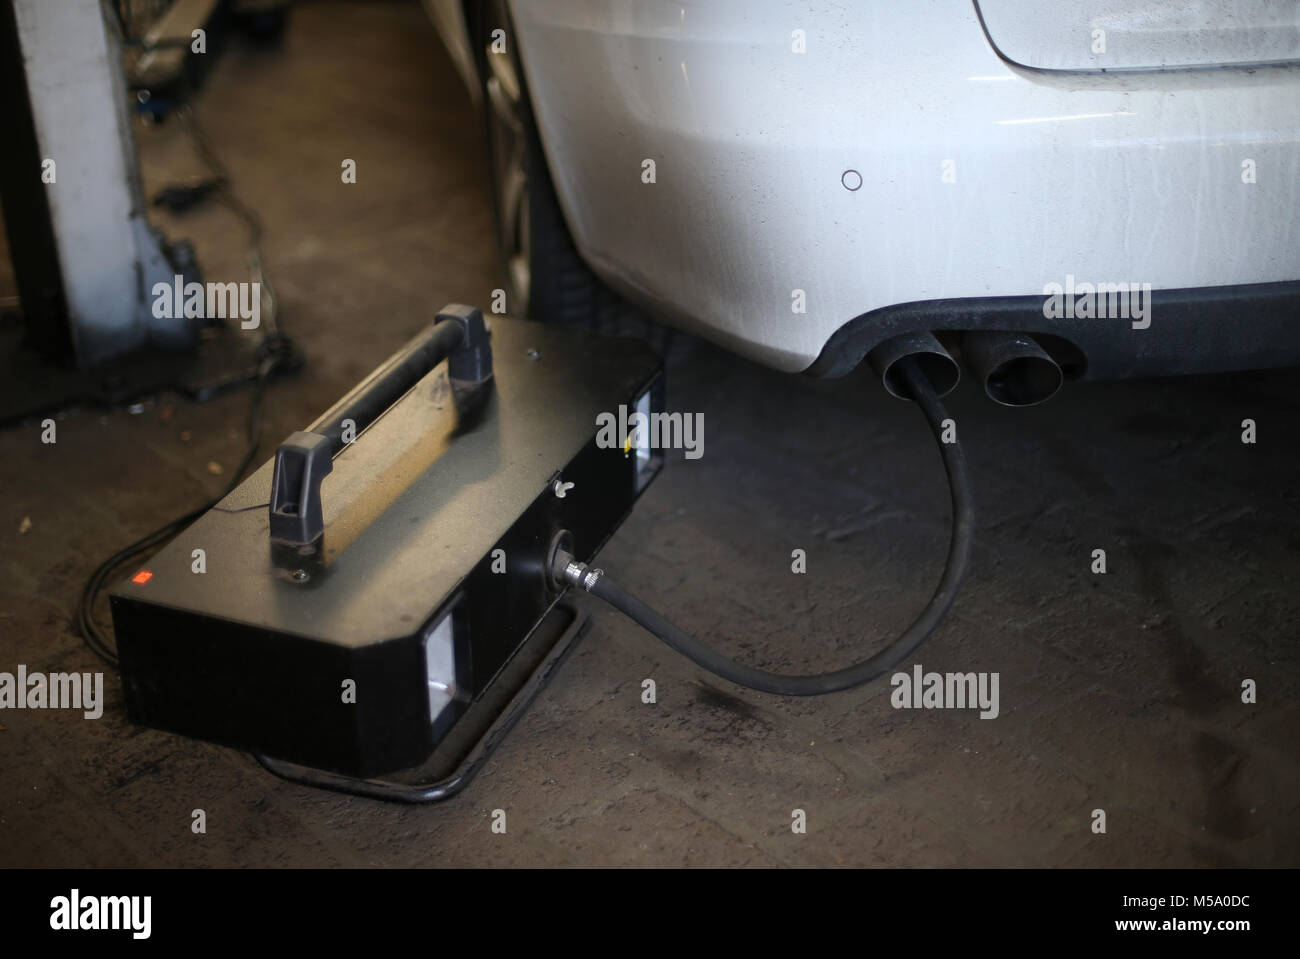 Audi A4 Tdi High Resolution Stock Photography and Images - Alamy